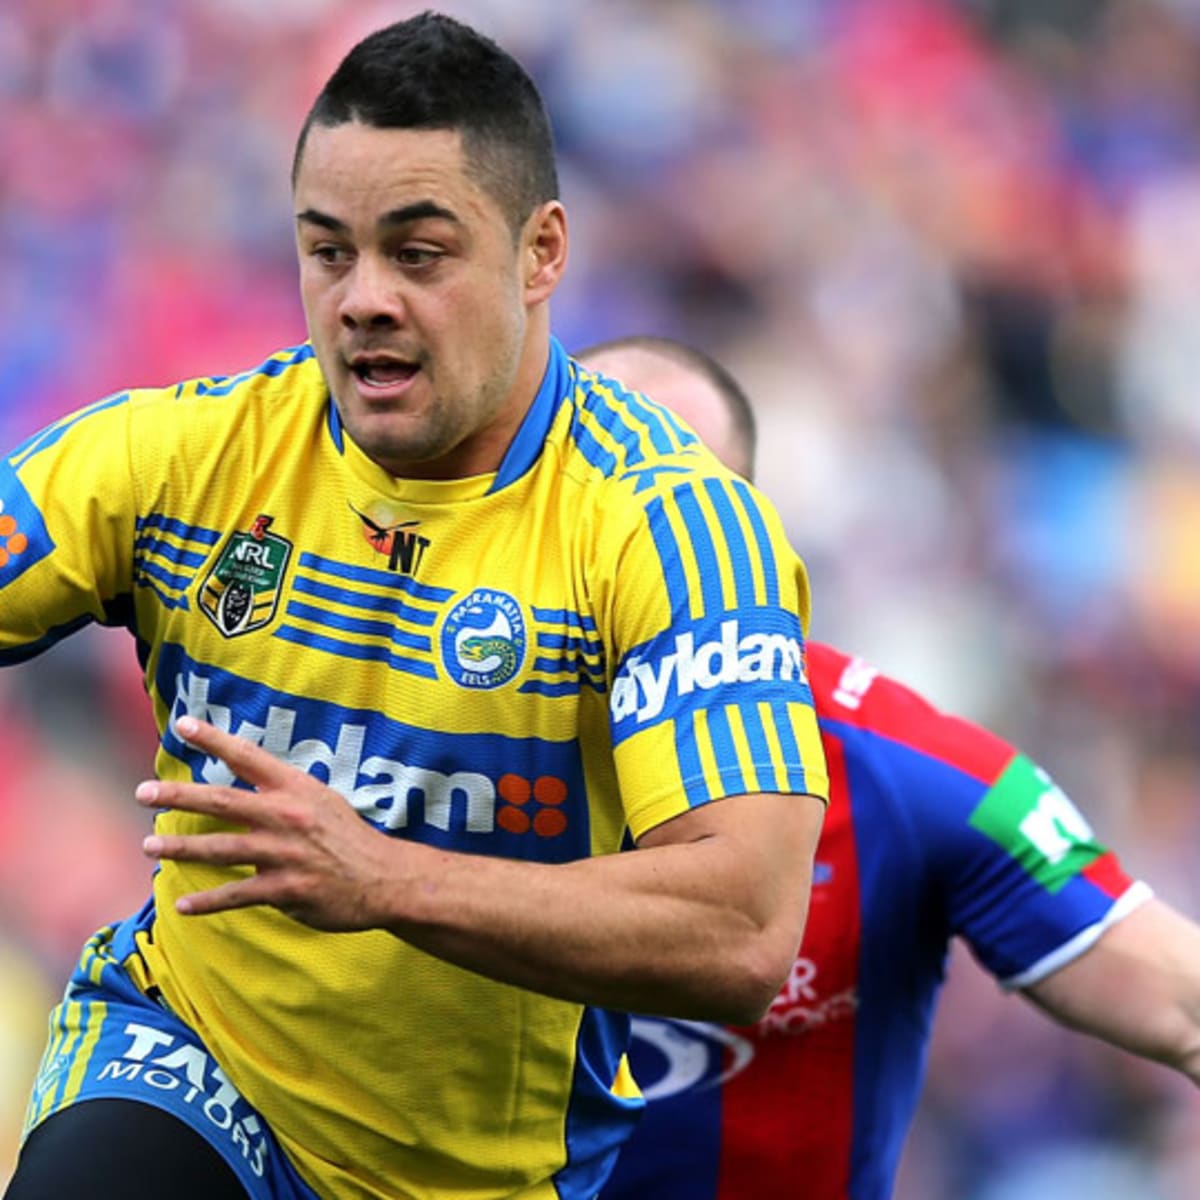 Australian rugby star Jarryd Hayne signs with 49ers - Sports Illustrated